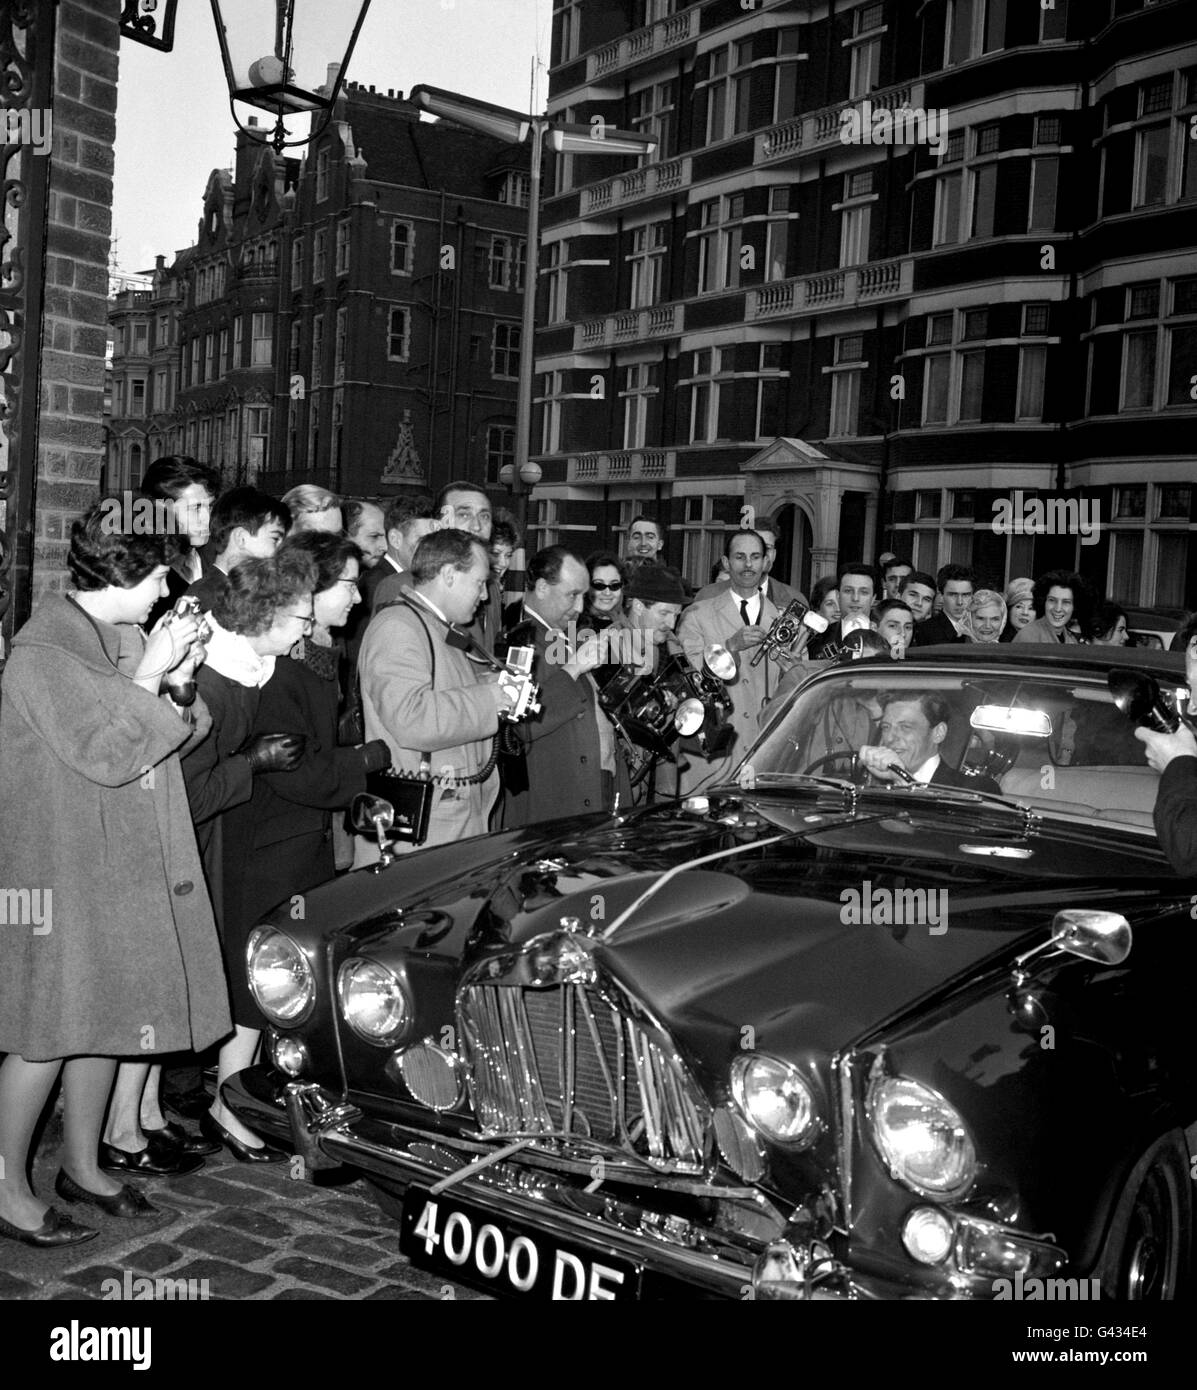 Angus Ogilvy, driving a jaguar car with a badly-damaged front, following a collision with a Morris Traveller, whose driver was quoted as saying 'I'll never get the damage repaired'. Ogilvy was arriving at Kensington Palace, London, before leaving with his fiancee Princess Alexandra of Kent, for a ball being given by the Queen at Windsor Castle. Stock Photo